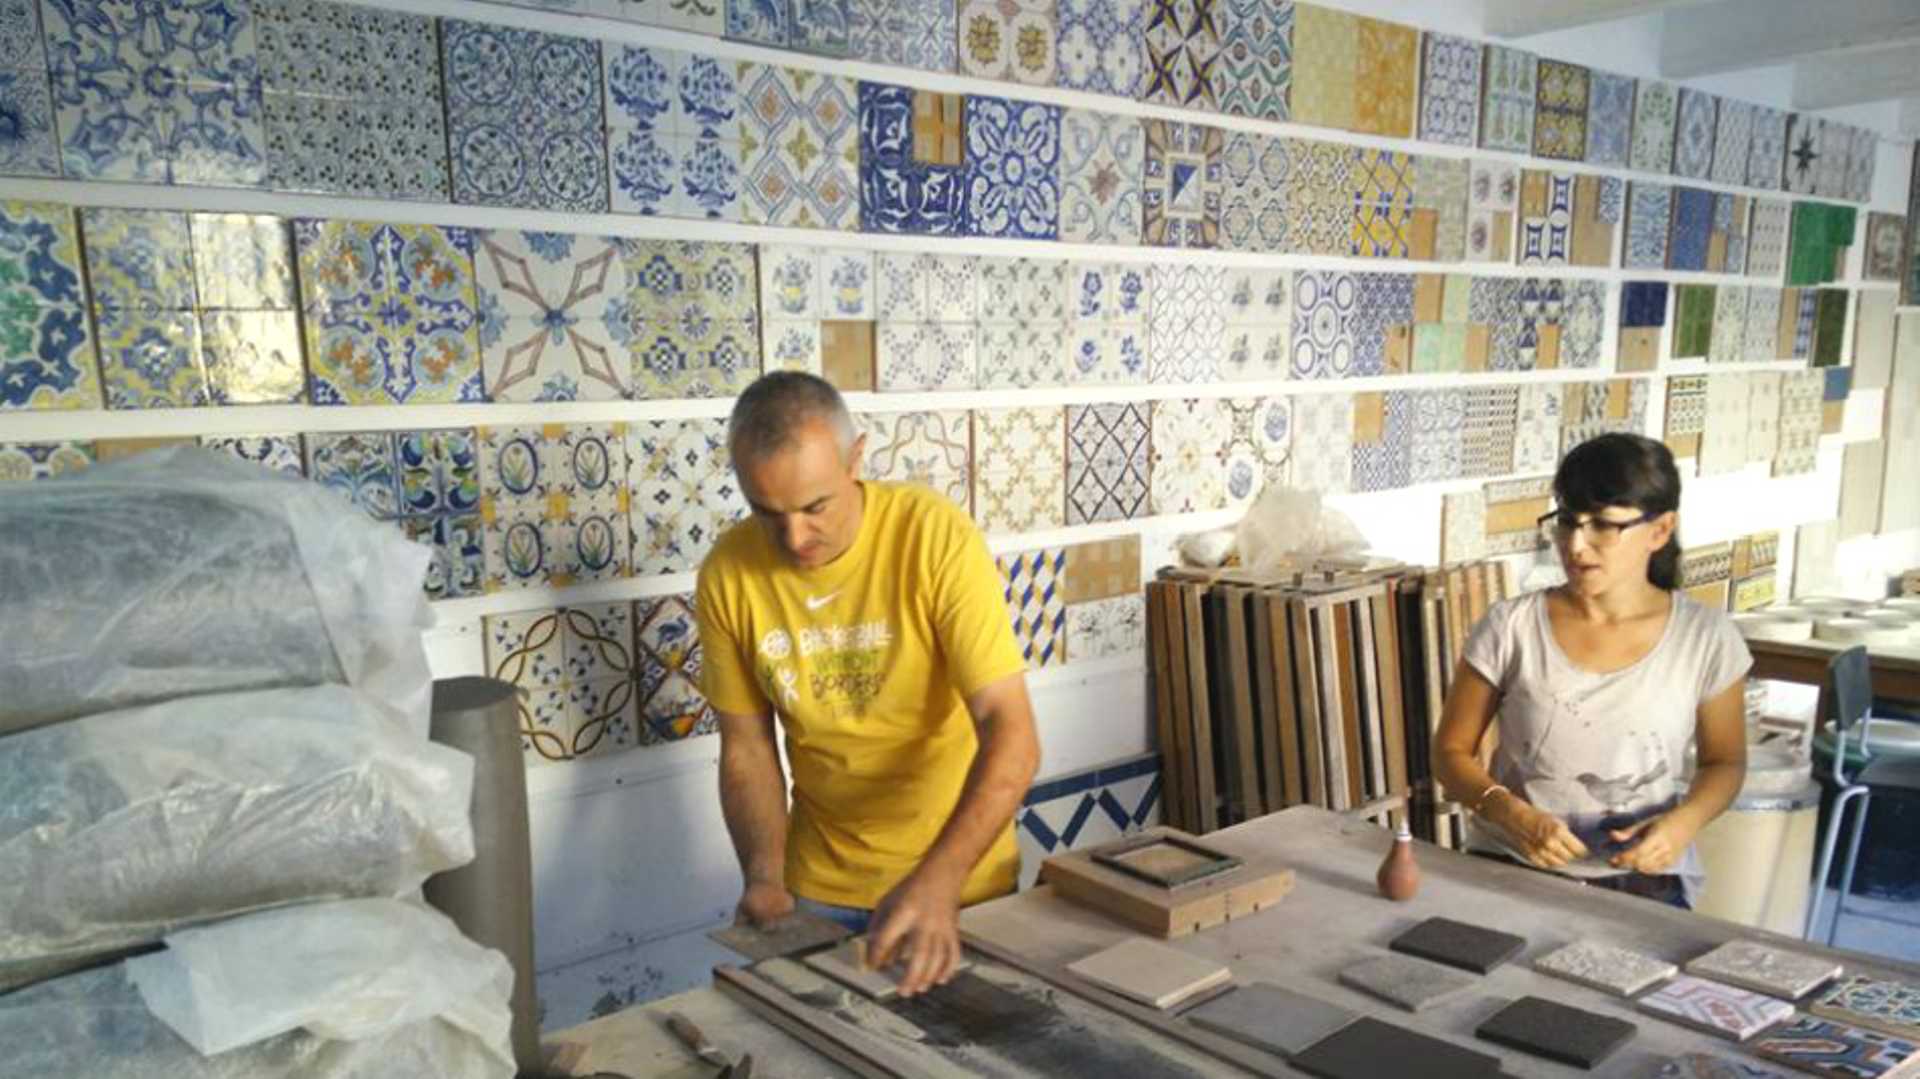 Tiles and Tales: Azulejos Workshop and Private Tour